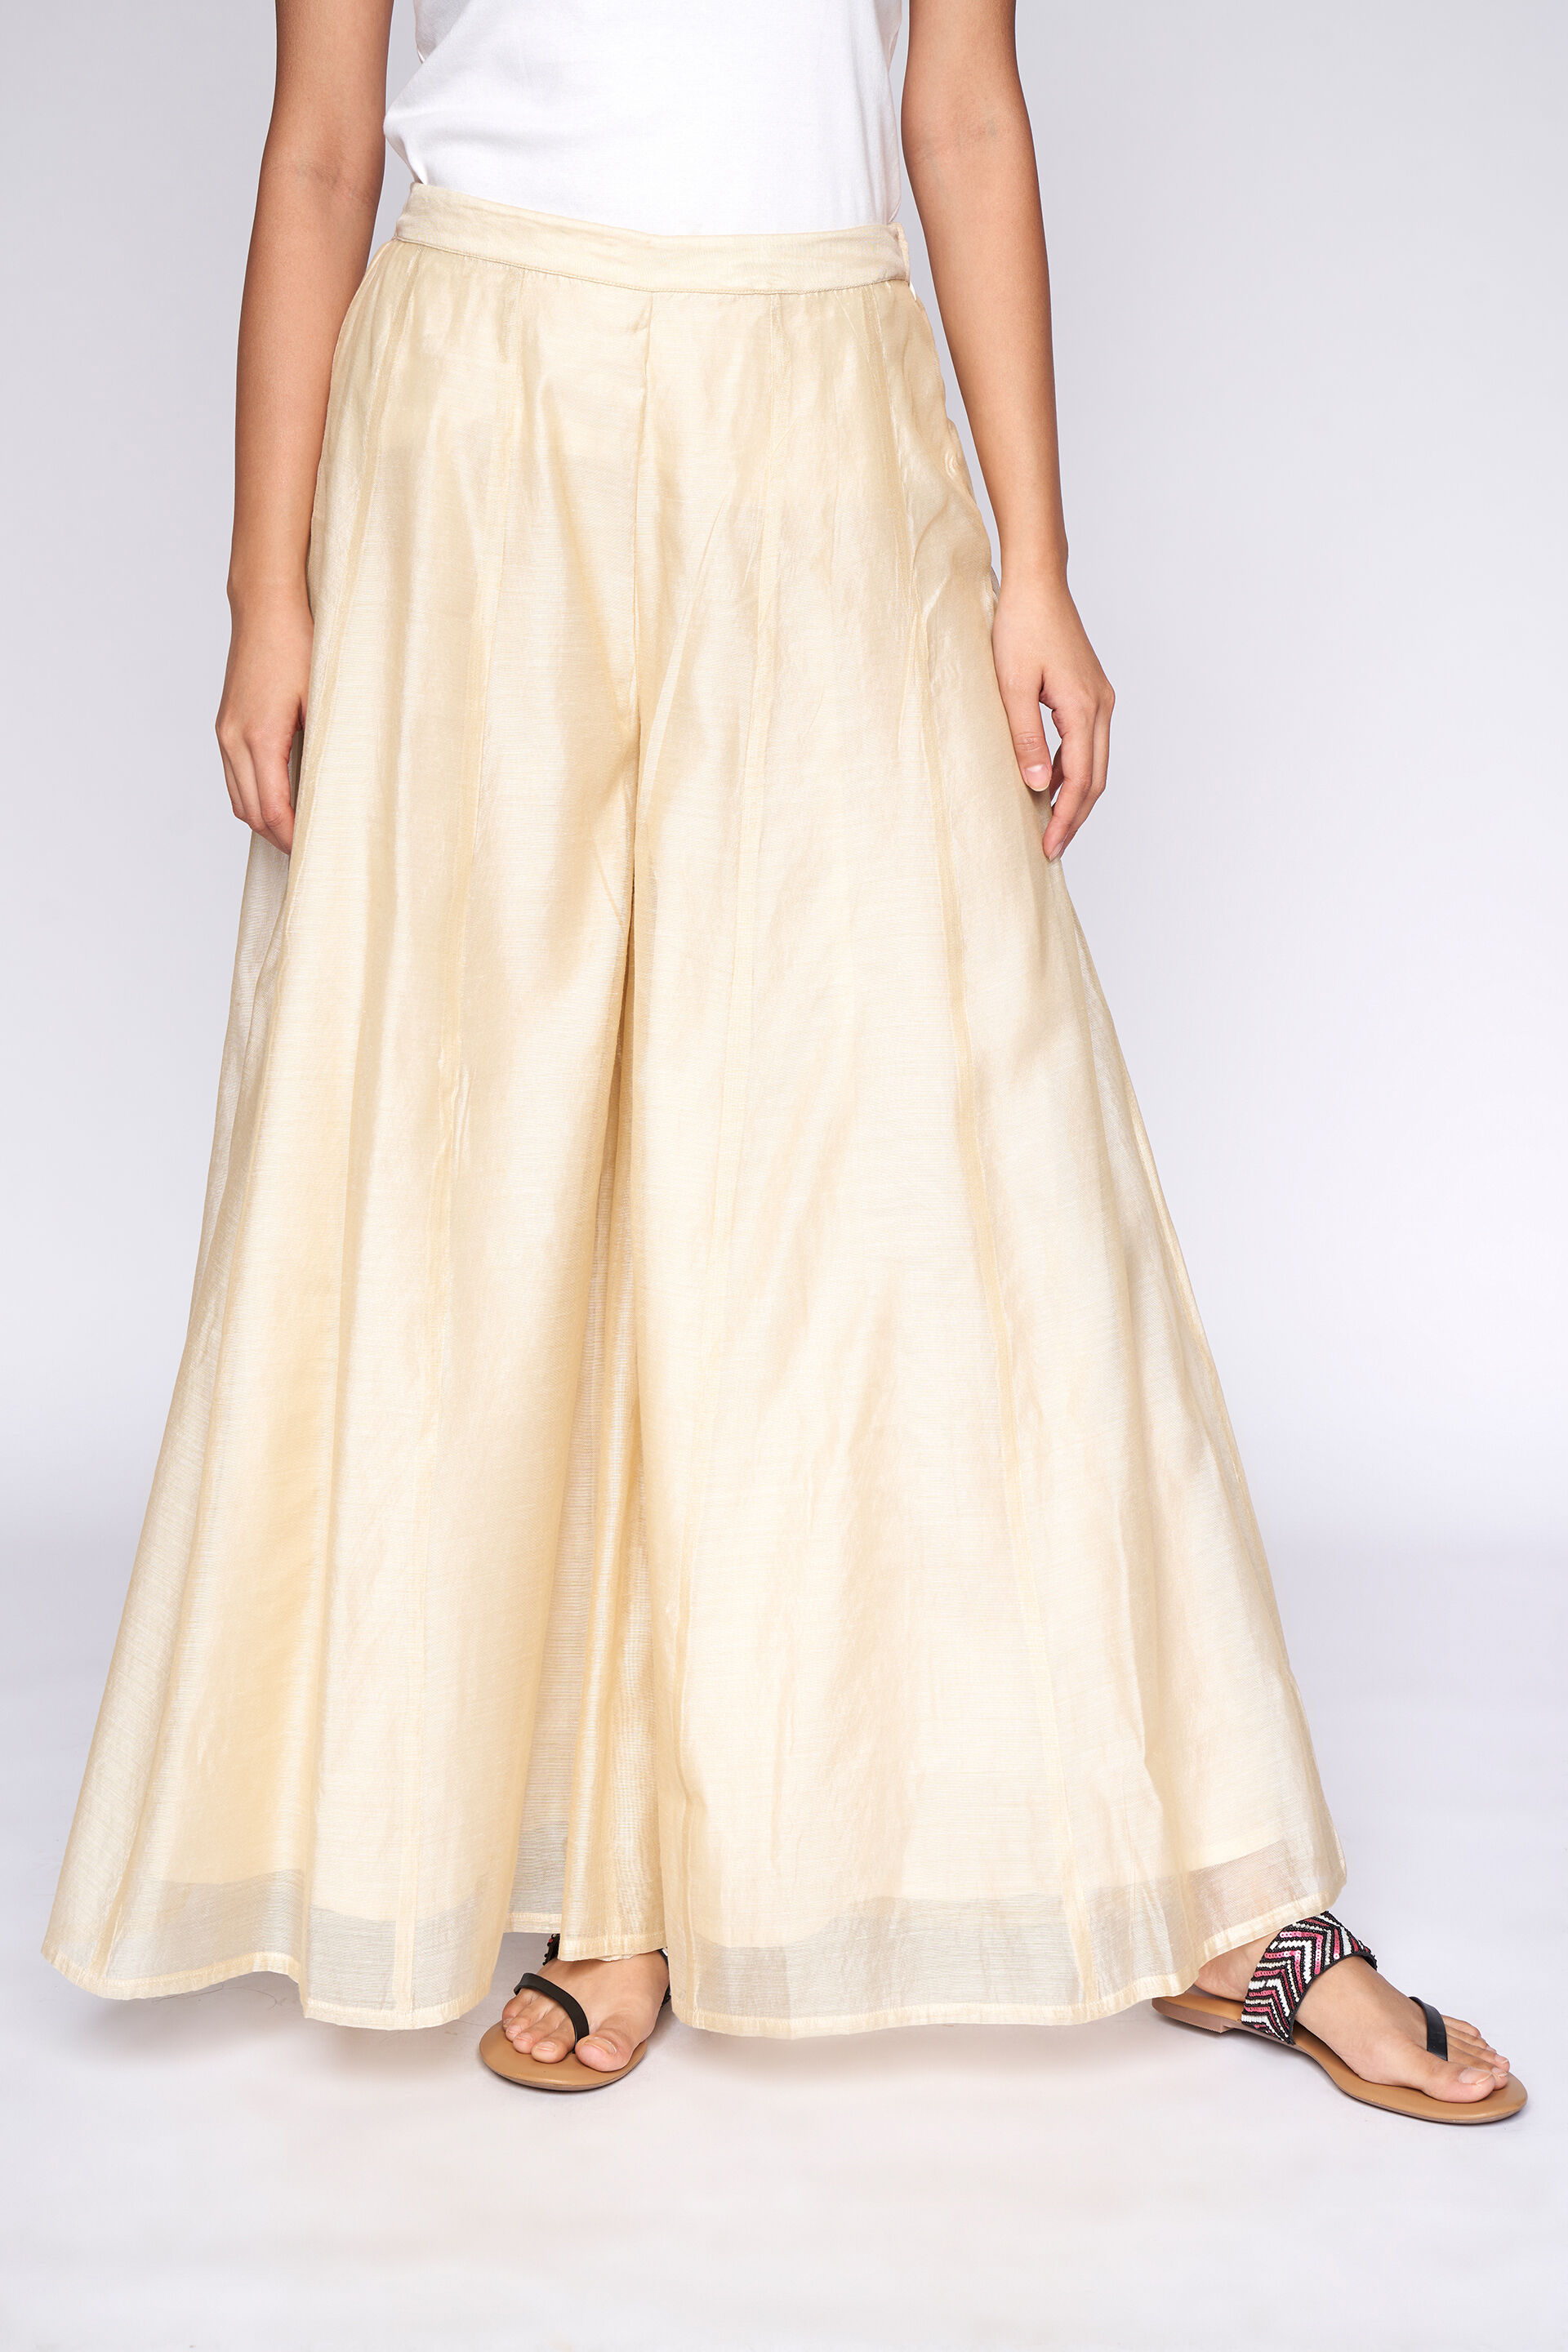 Buy AURELIA Cream Coloured Solid Palazzo Trousers - Palazzos for Women  1728315 | Myntra